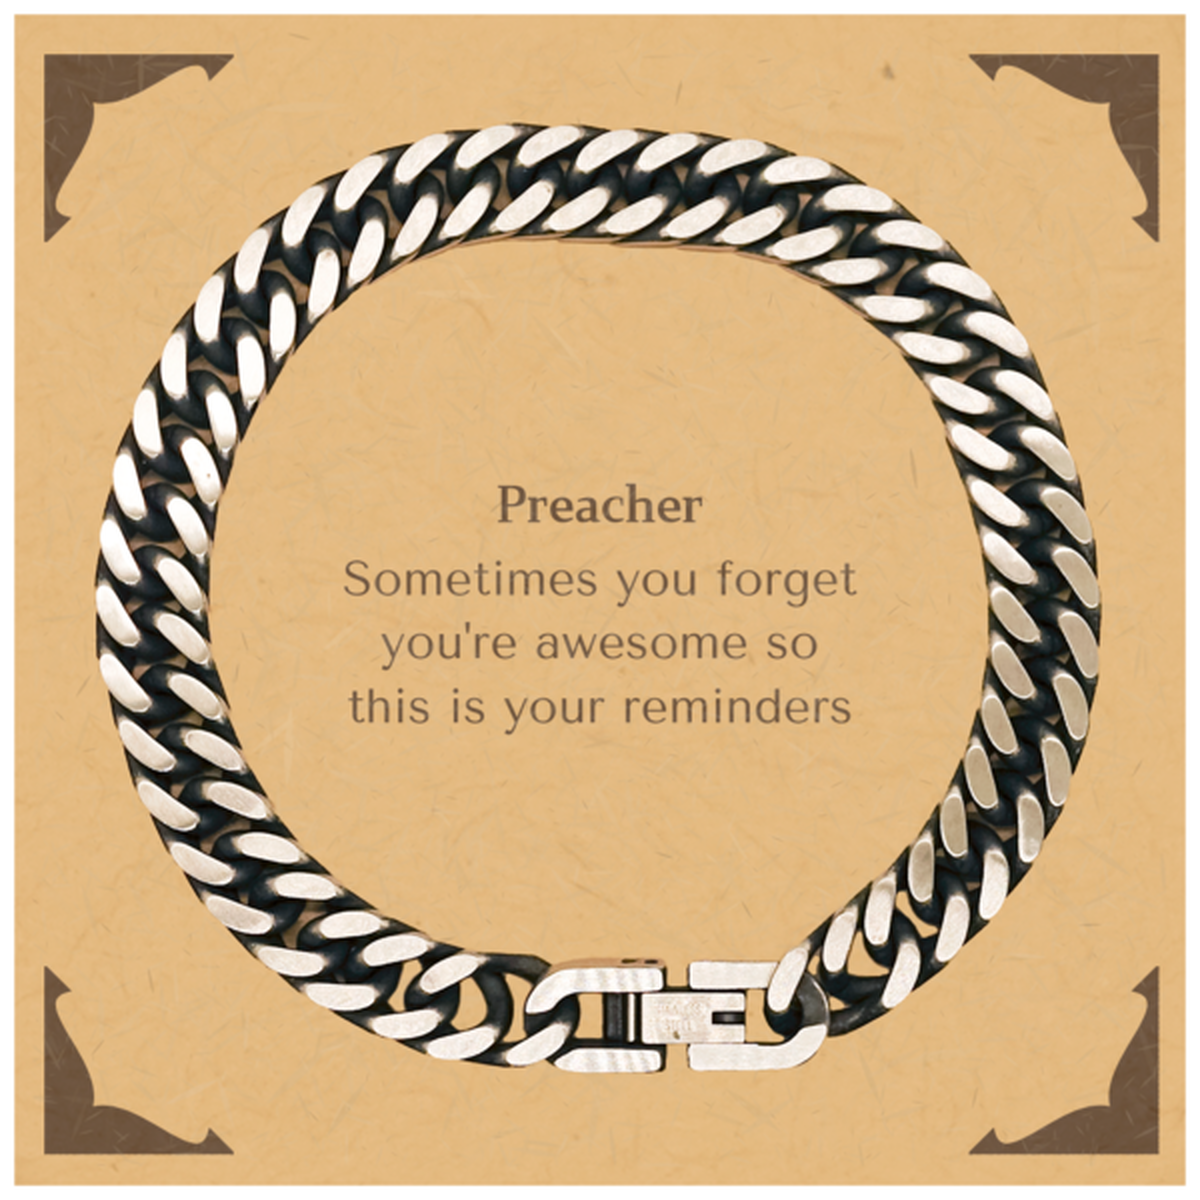 Sentimental Preacher Cuban Link Chain Bracelet, Preacher Sometimes you forget you're awesome so this is your reminders, Graduation Christmas Birthday Gifts for Preacher, Men, Women, Coworkers